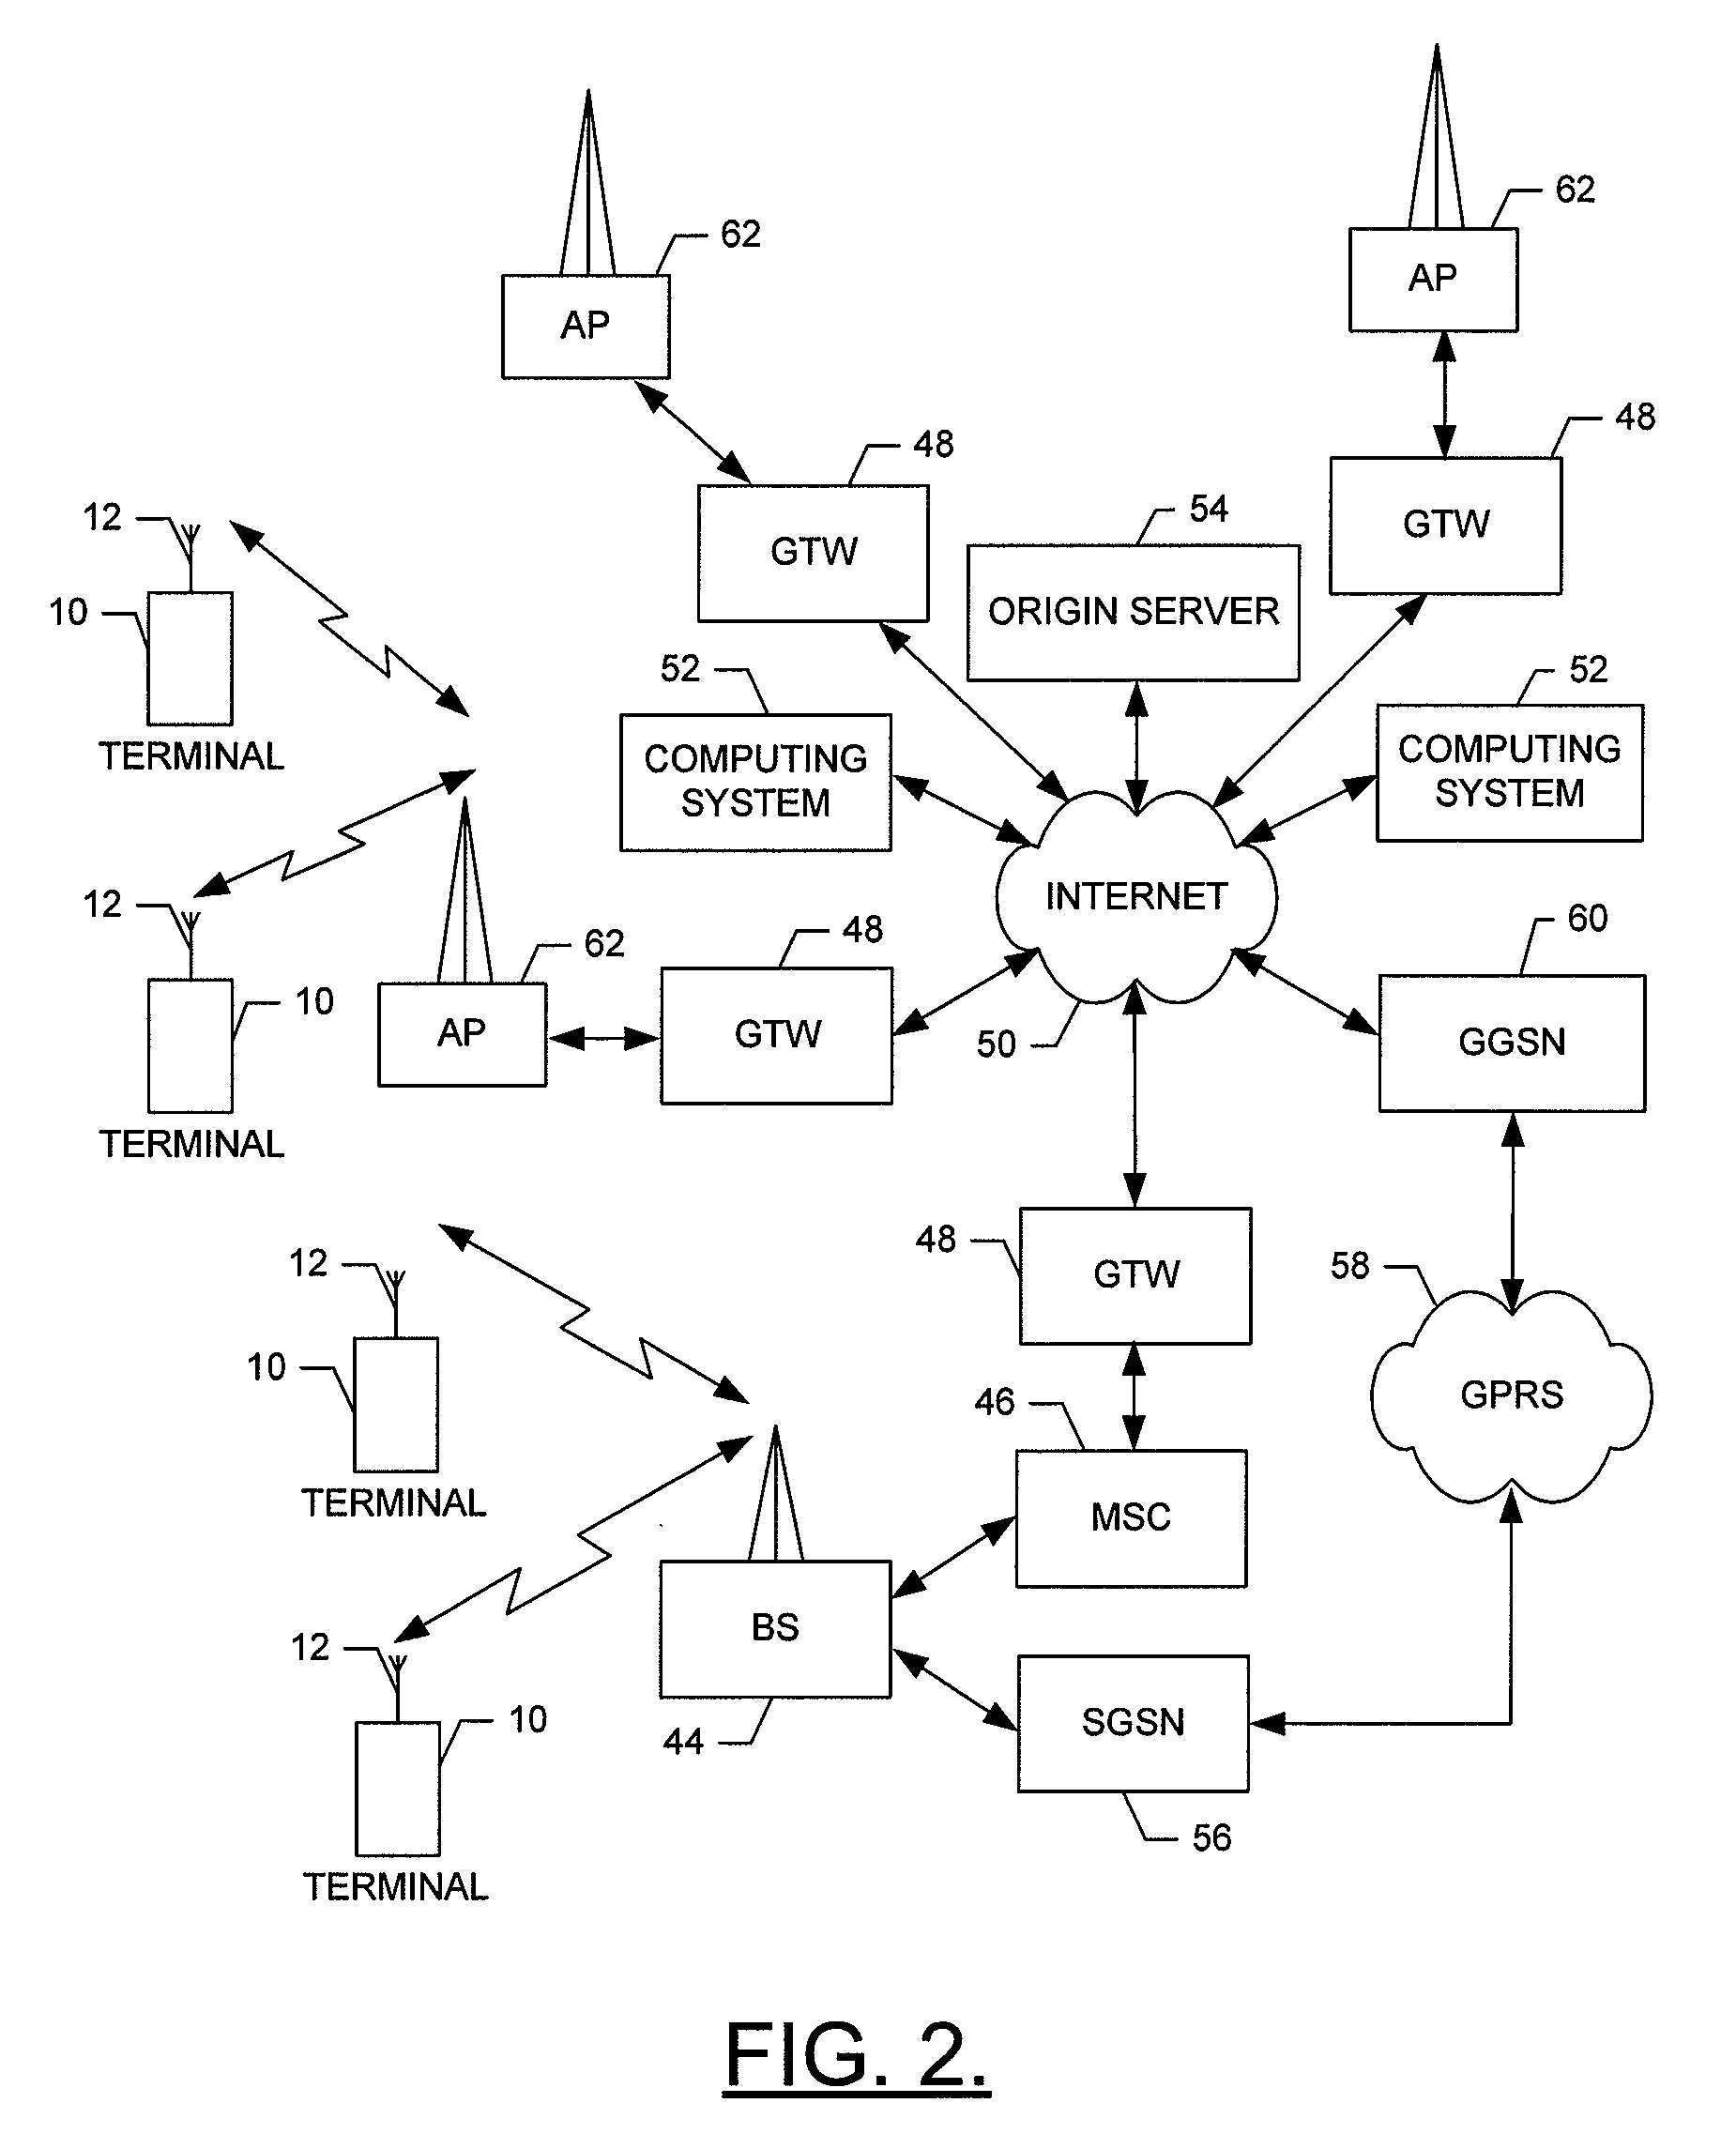 Method, Apparatus and Computer Program Product for Providing Automatic Delivery of Information to a Terminal